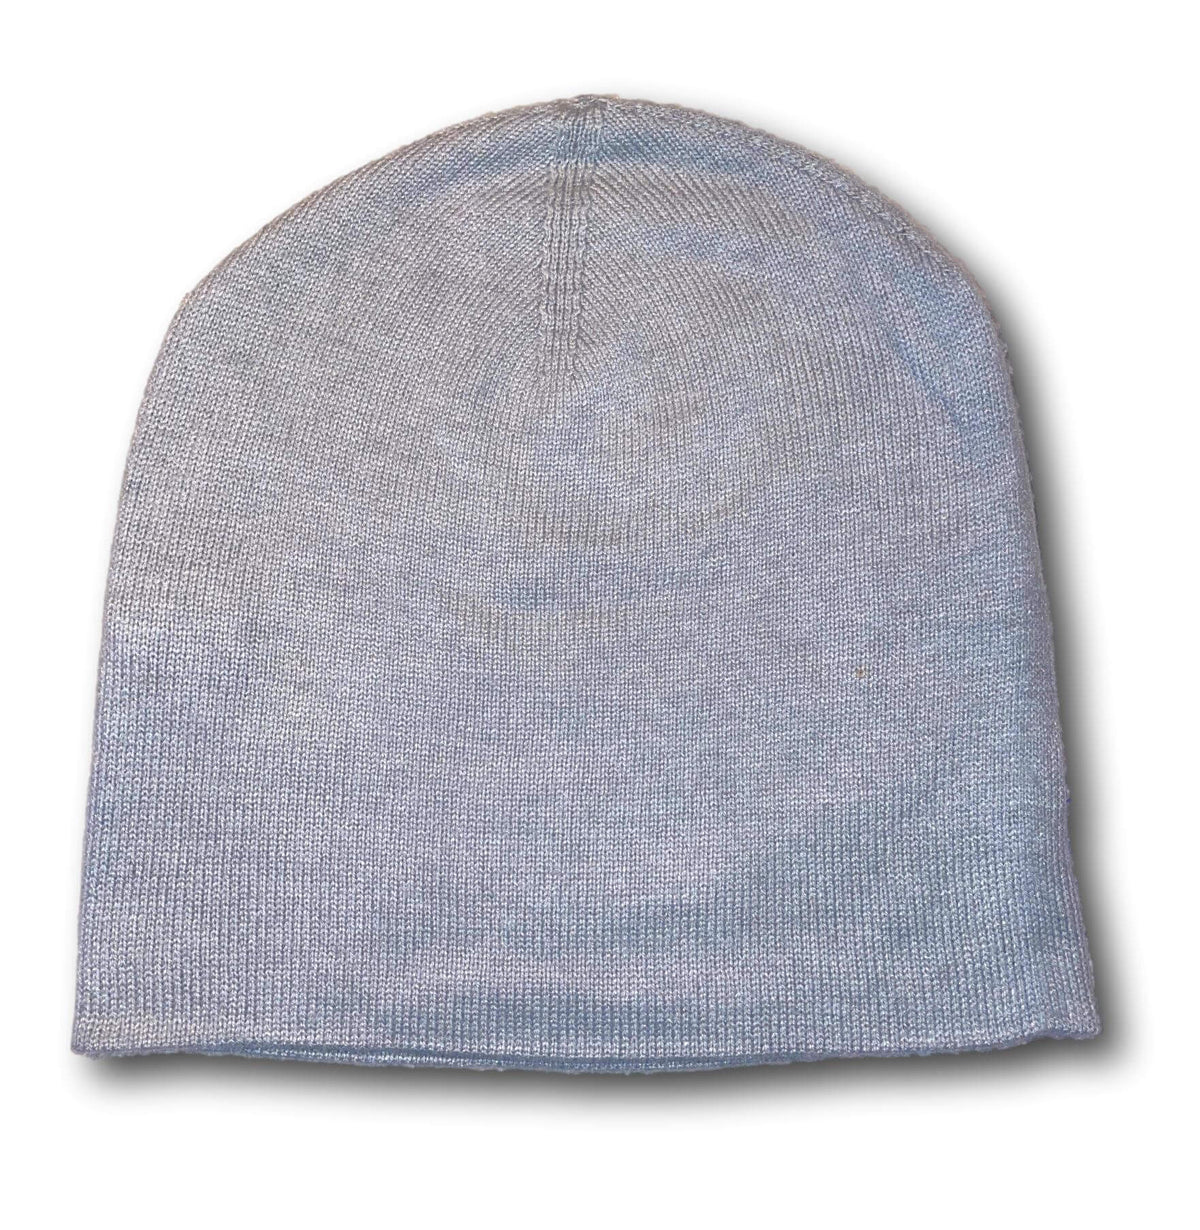 CASHMERE BEANIE - HANDMADE IN NEPAL 🇳🇵 UNISEX &amp; ONE SIZE FITS MOST + SINGING BOWLS AND MEDITATION